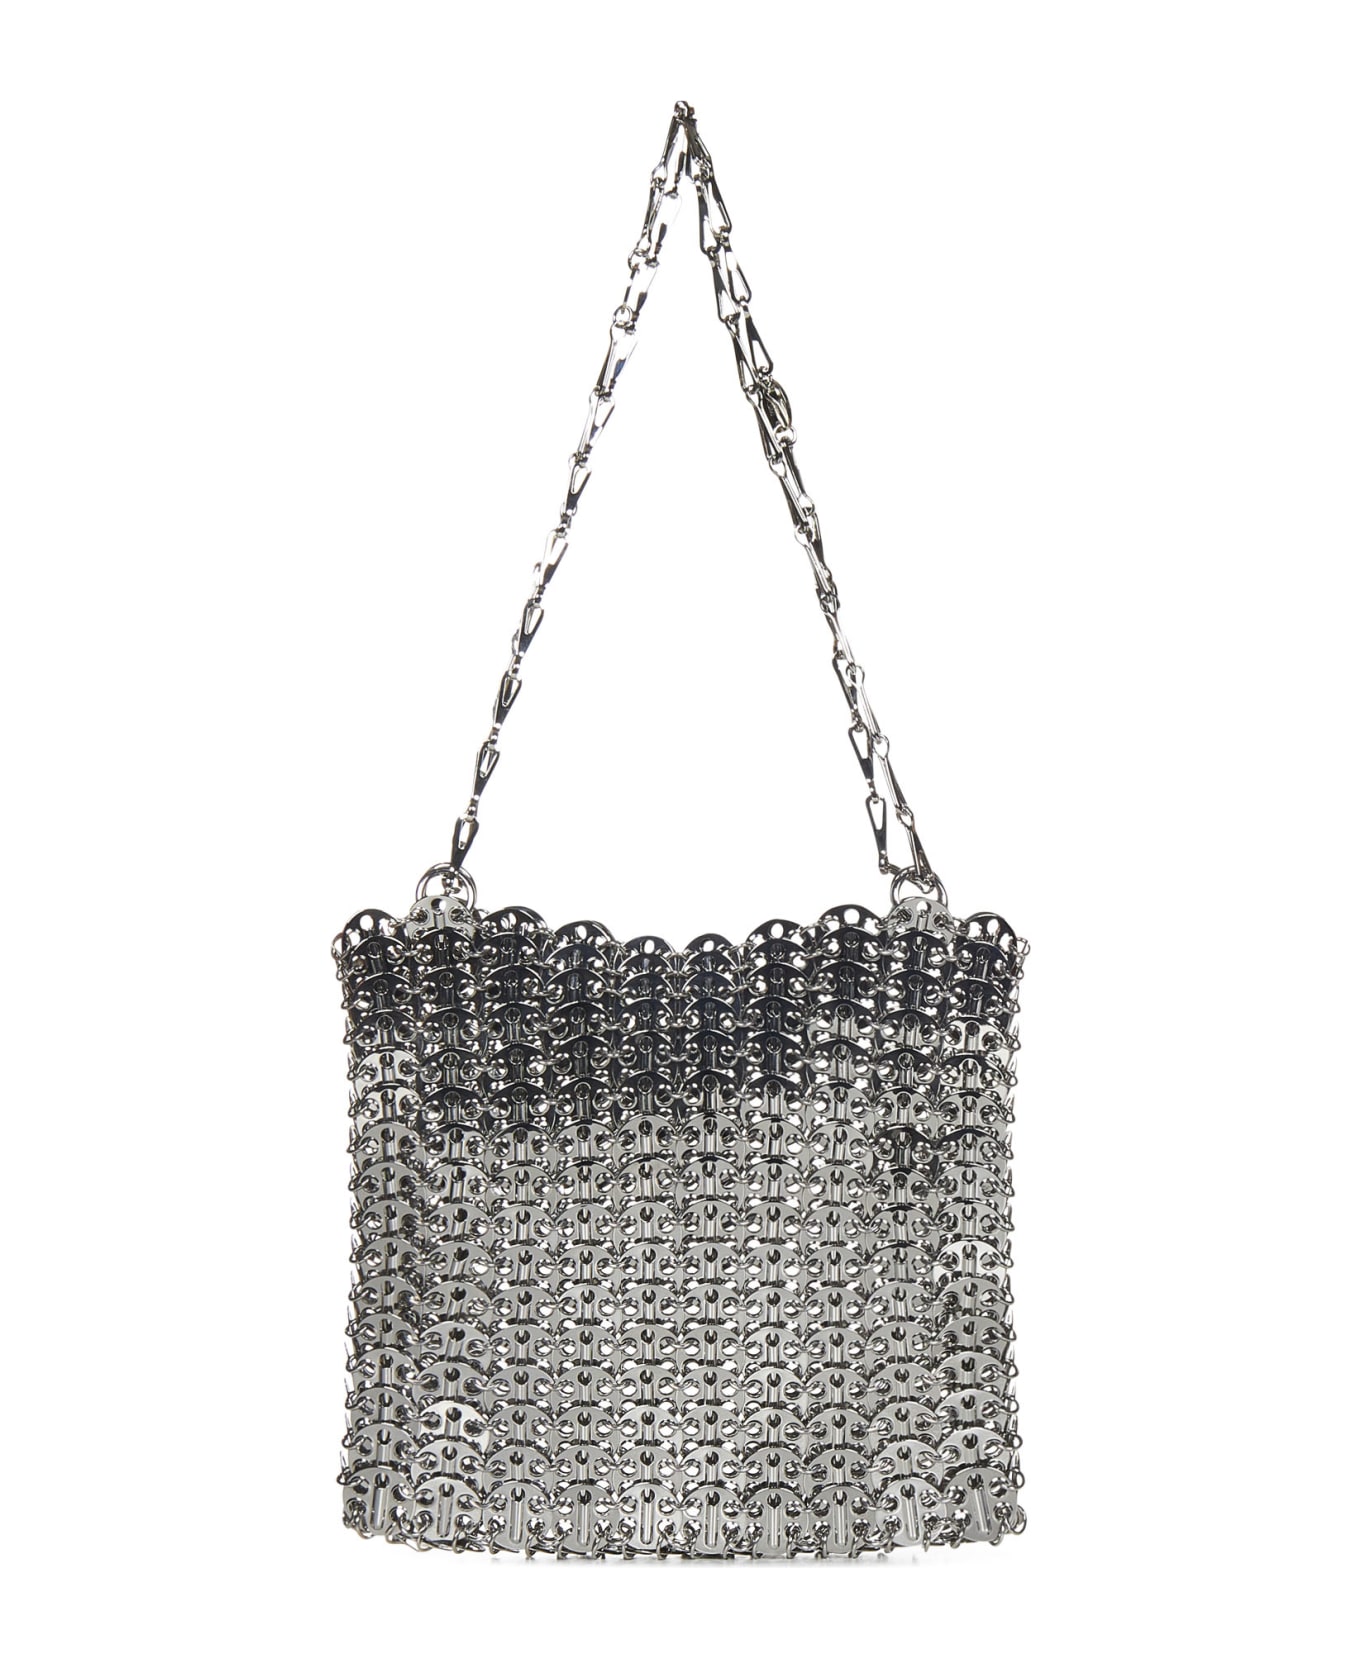 Paco Rabanne Paco Iconic Silver 1969 Shoulder Bag - Silver